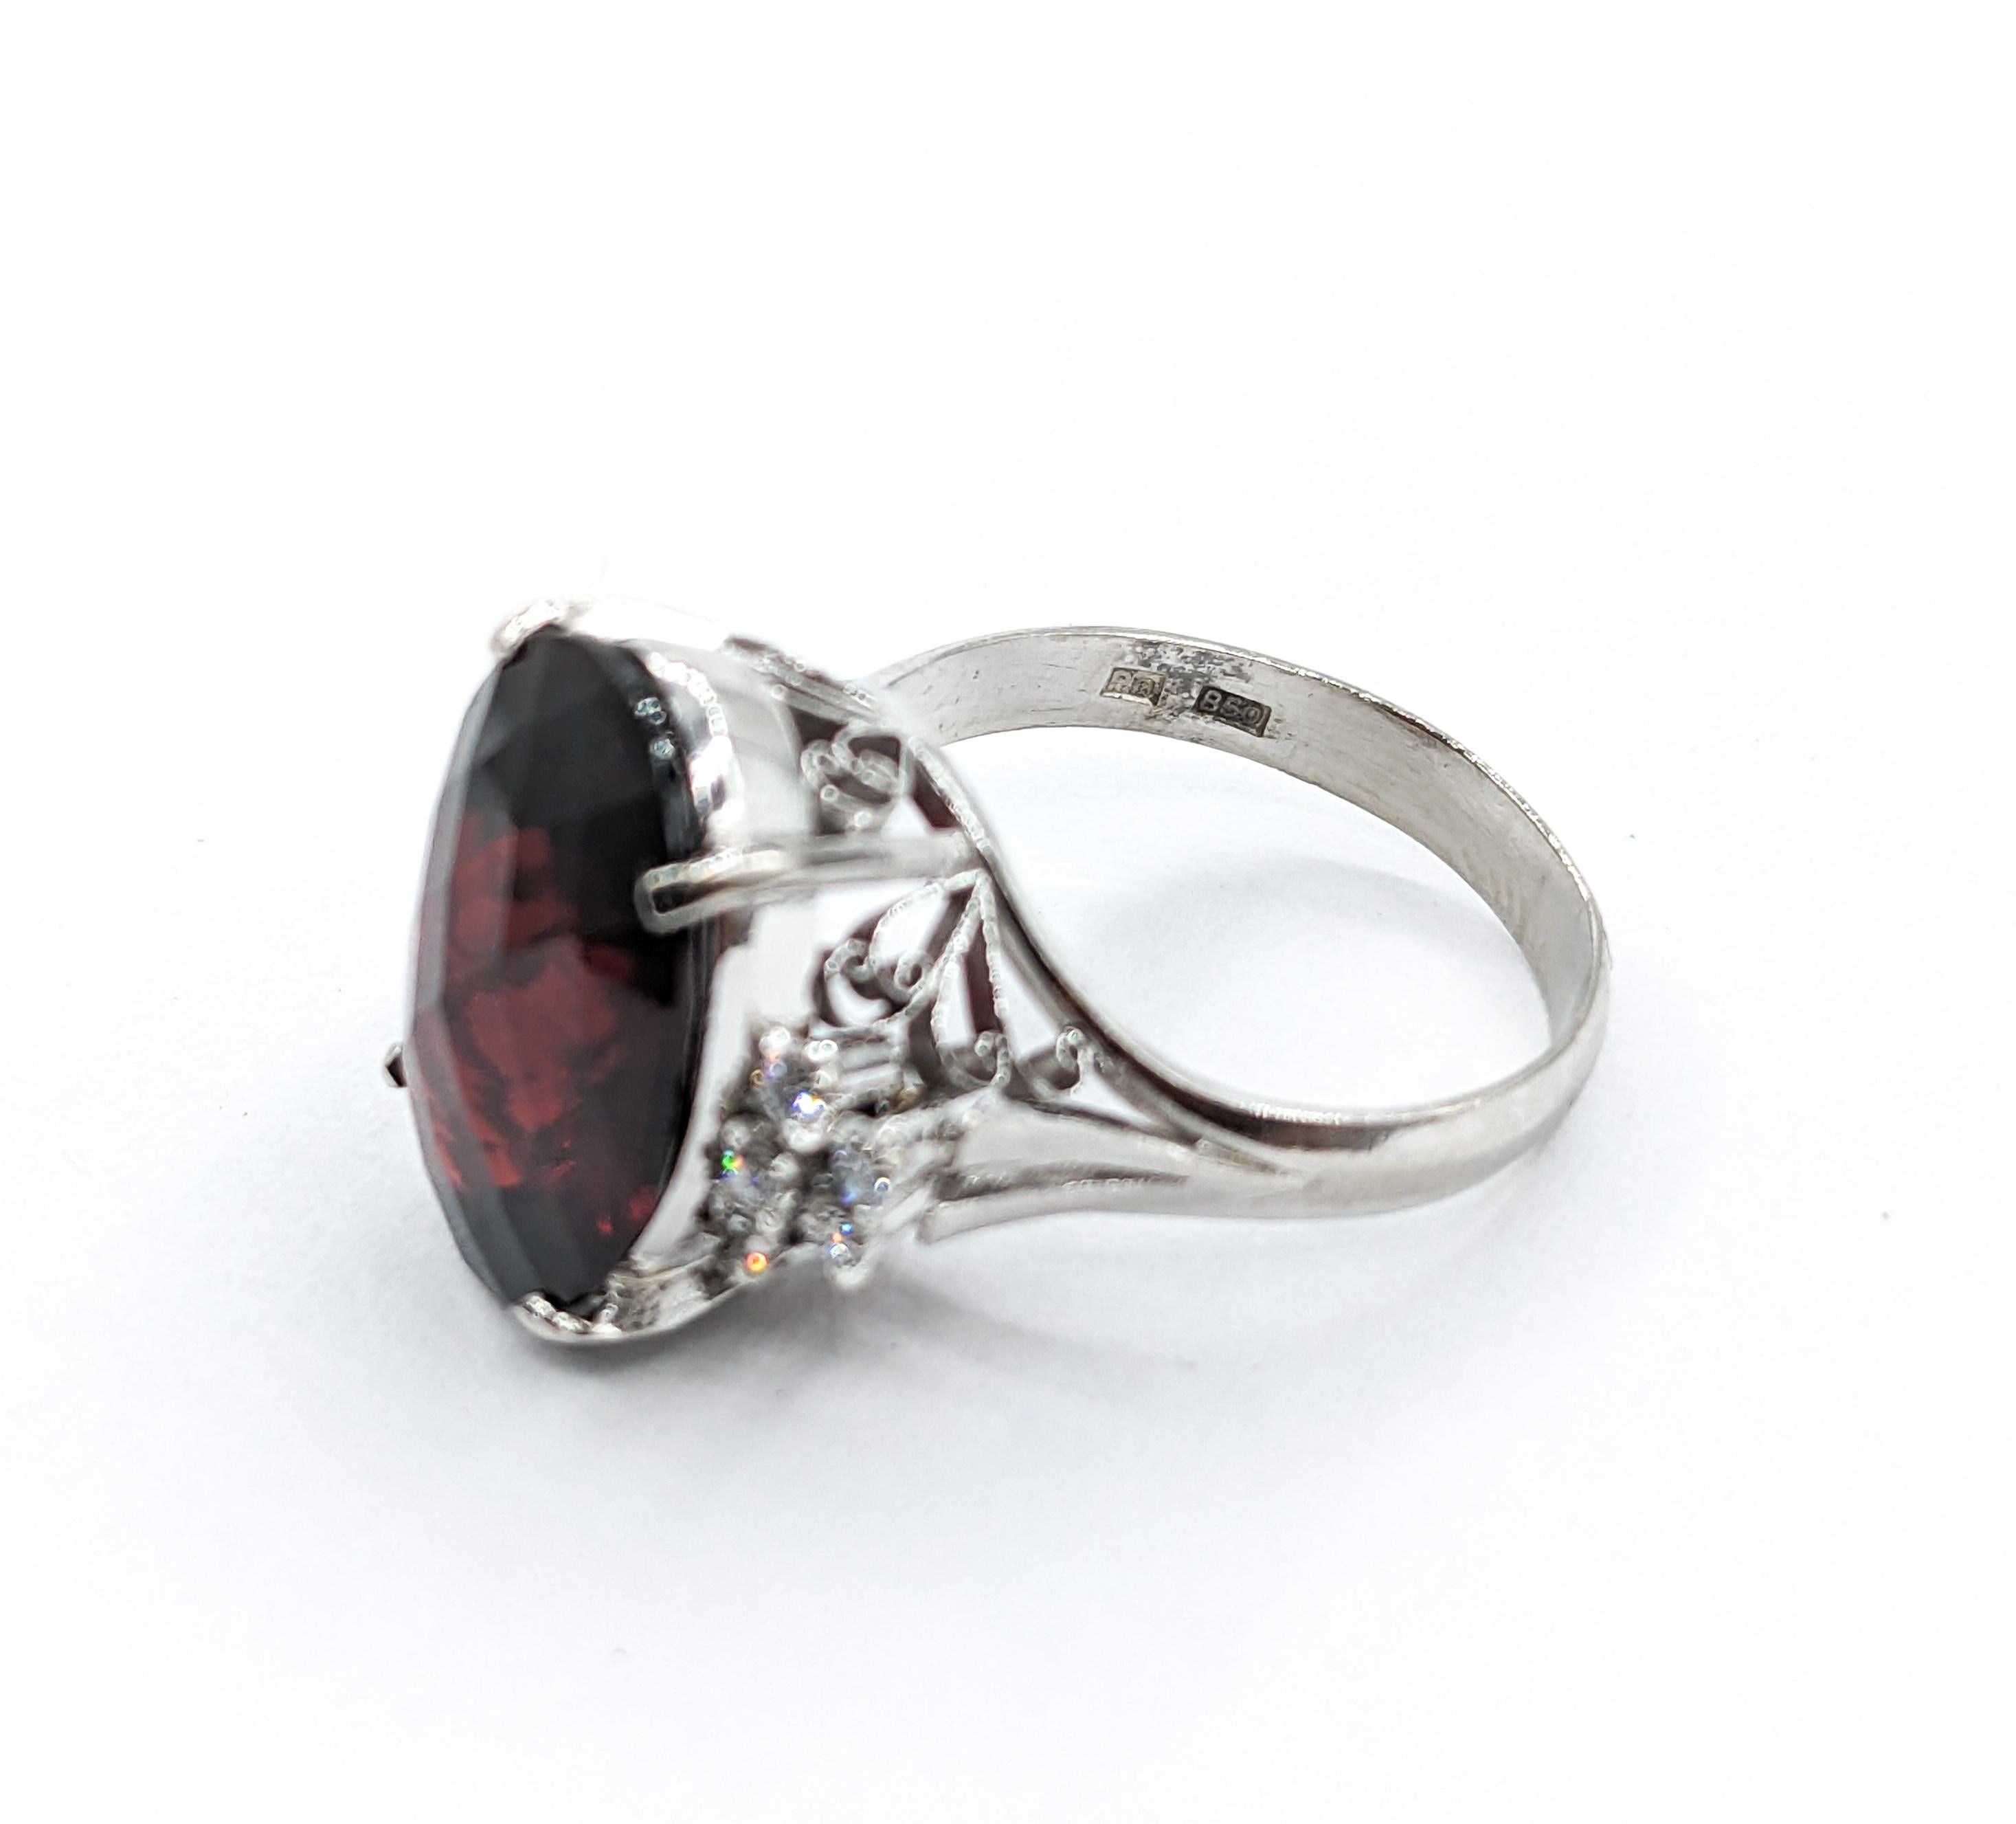 9.88ct Garnet & Diamond Ring In 850pt Platinum In Excellent Condition For Sale In Bloomington, MN